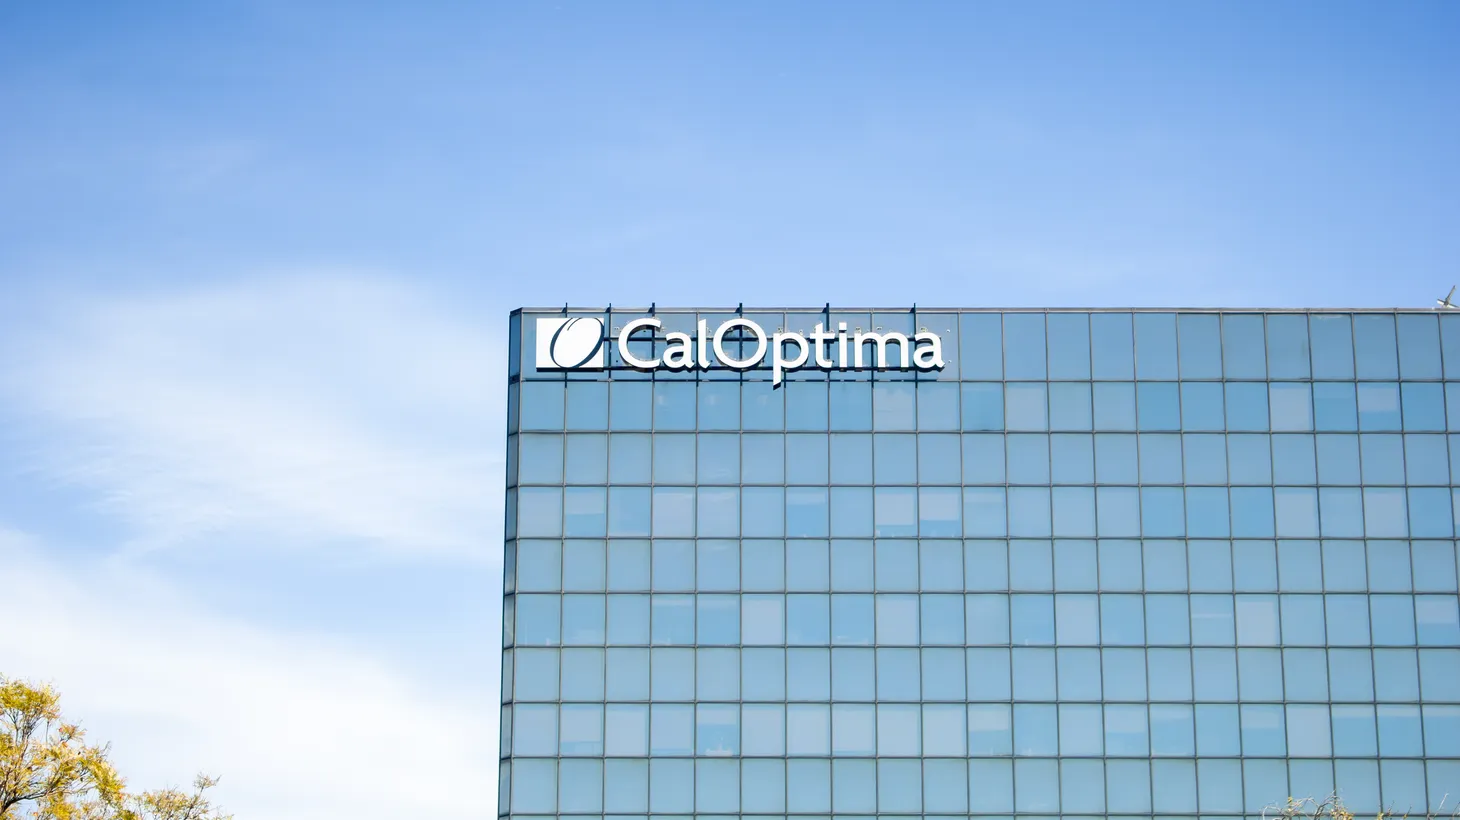 CalOptima’s building is seen in Garden Grove, California. The system was set up in the 1990s to administer Medical and Medicaid, and it’s faced backlash for becoming increasingly politicized over the past decade.